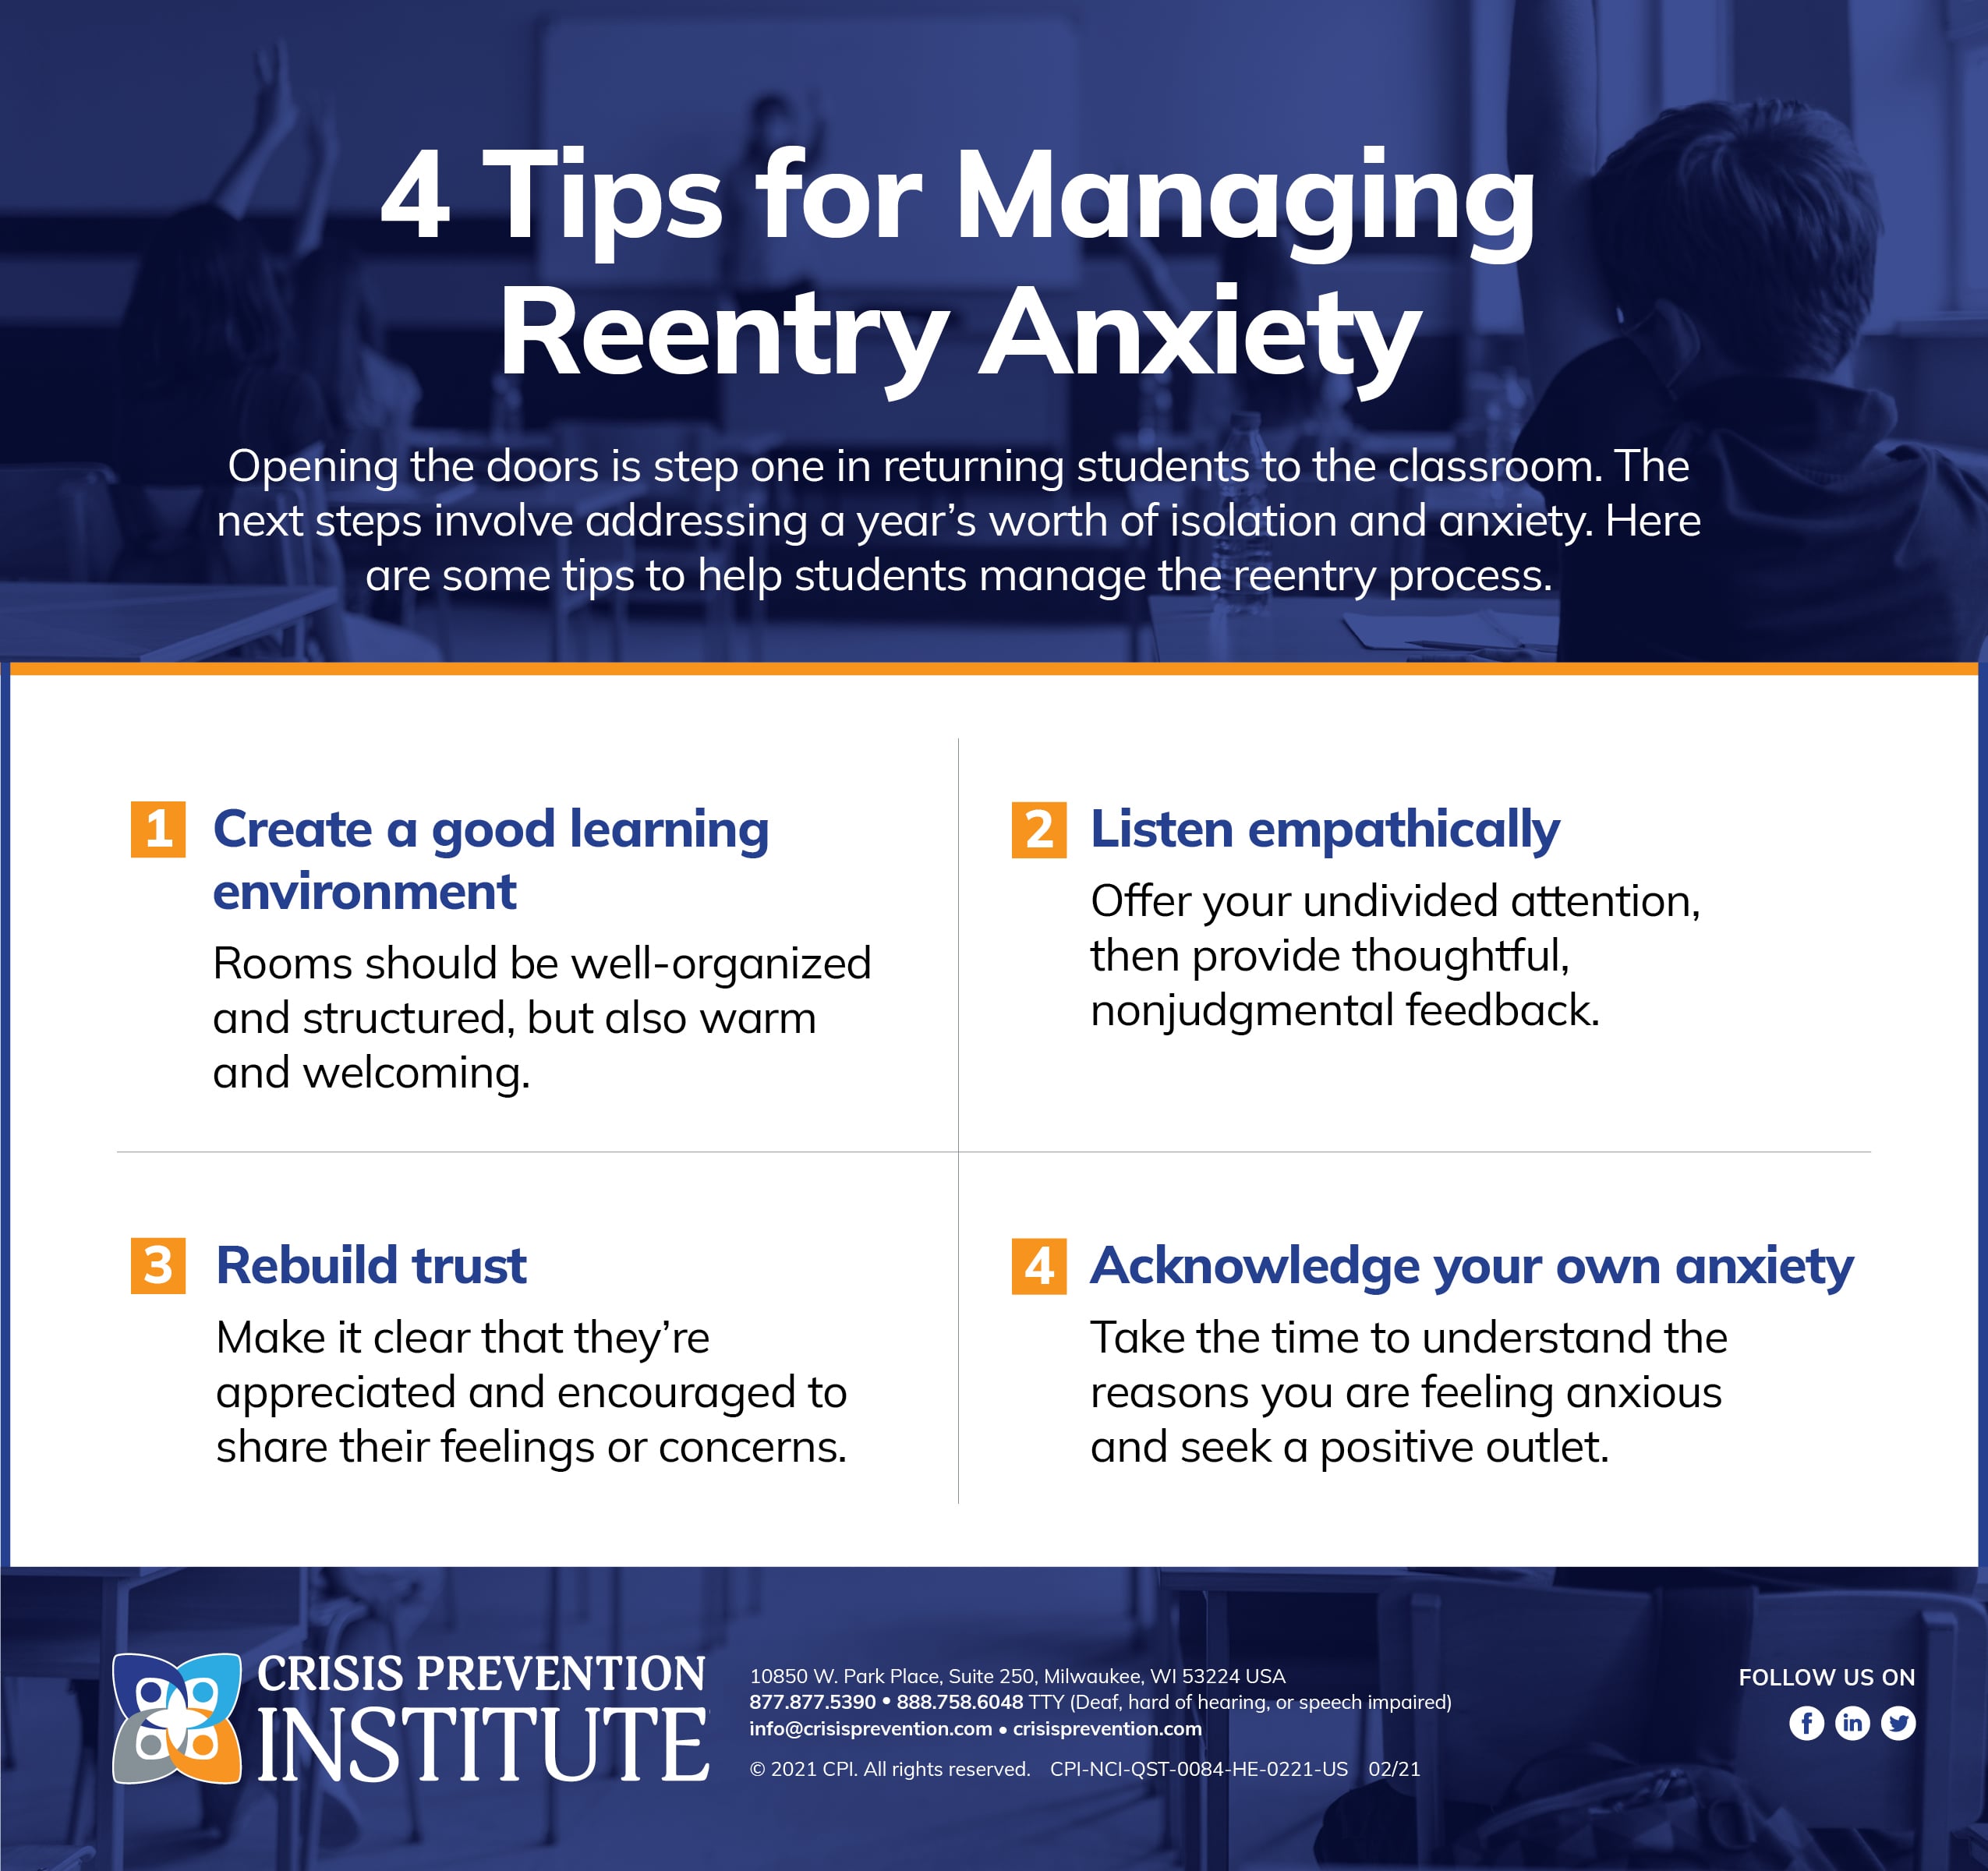 4 Tips for Managing Reentry Anxiety